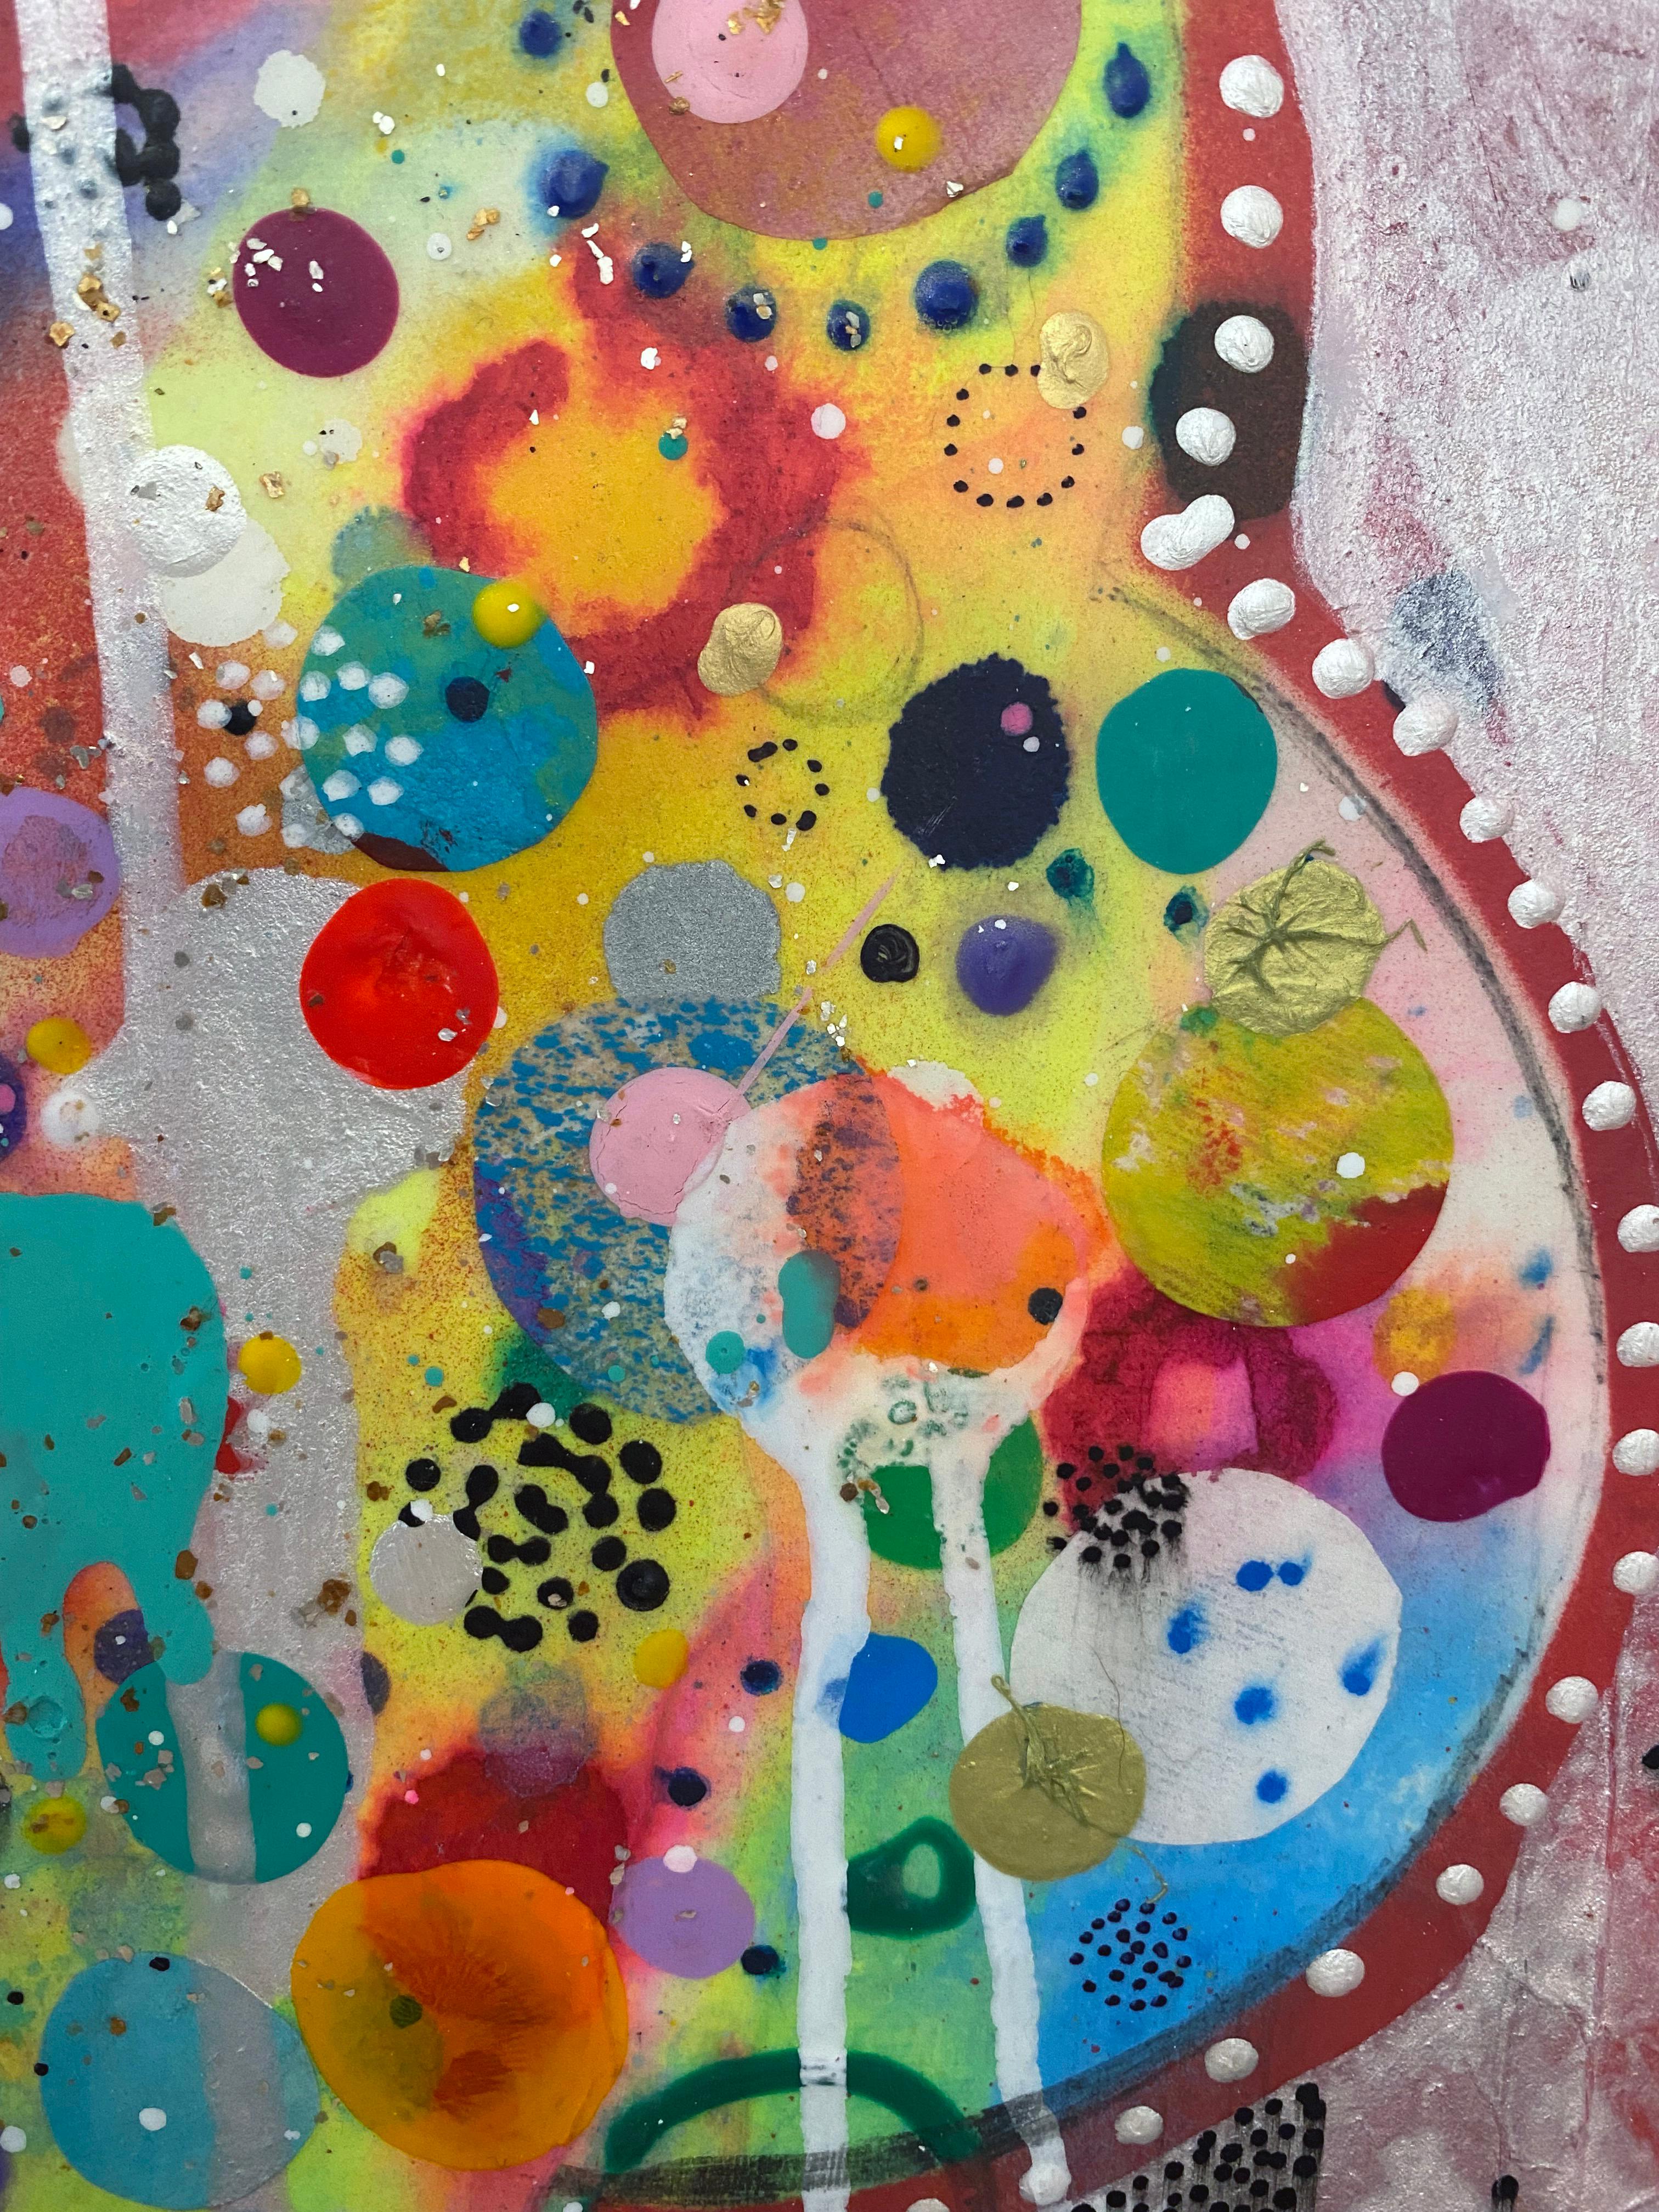 Abstract, Colorful Mixed Media Painting by Liz Tran 'Mini Cloud I' 2